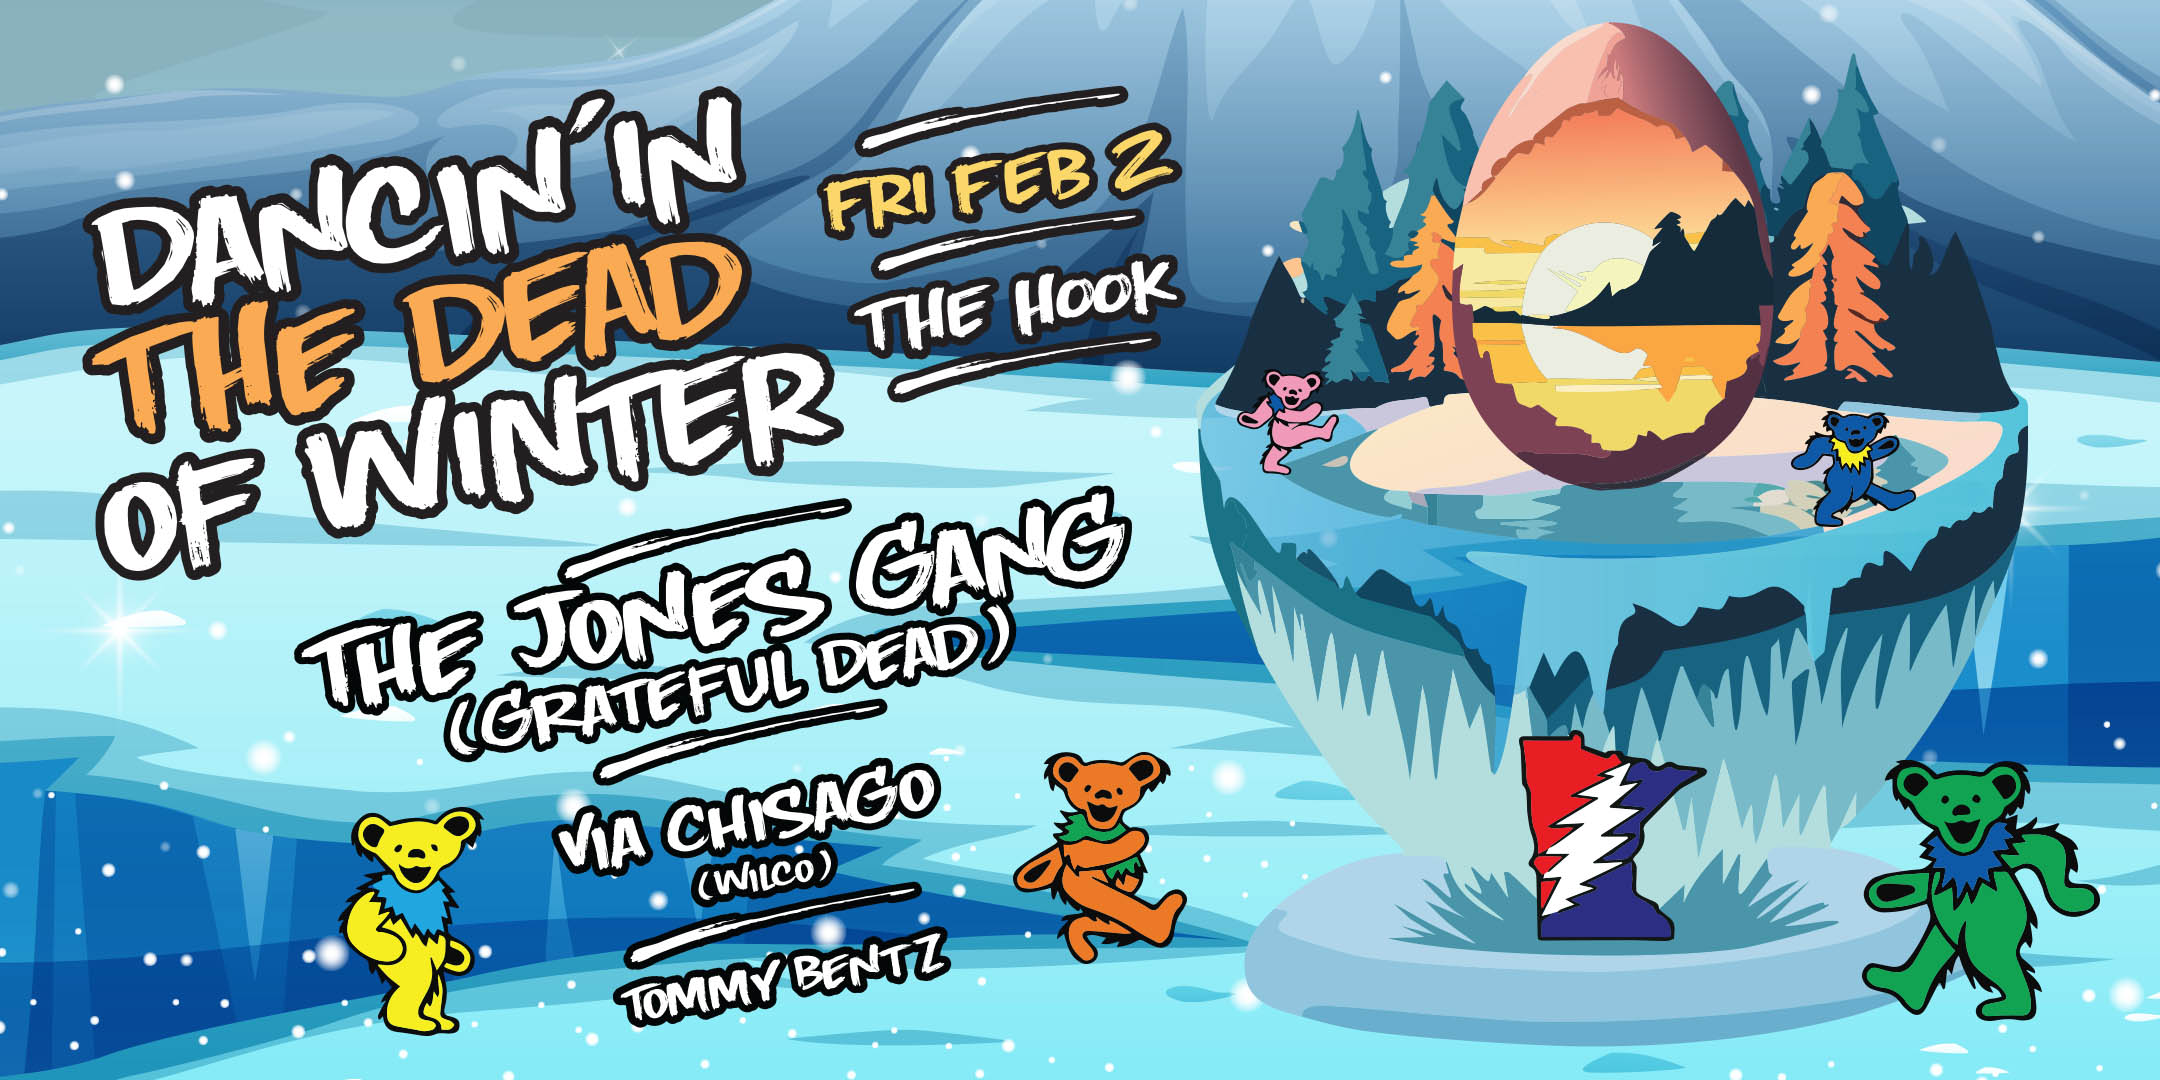 Dancin' In The Dead of Winter Featuring The Jones Gang (Grateful Dead) with Via Chisago (Wilco) & guest Tommy Bentz Friday, February 2 The Hook and Ladder Theater Doors 7:30pm :: Music 8:00pm :: 21+ General Admission: $15 ADV / $20 DOS